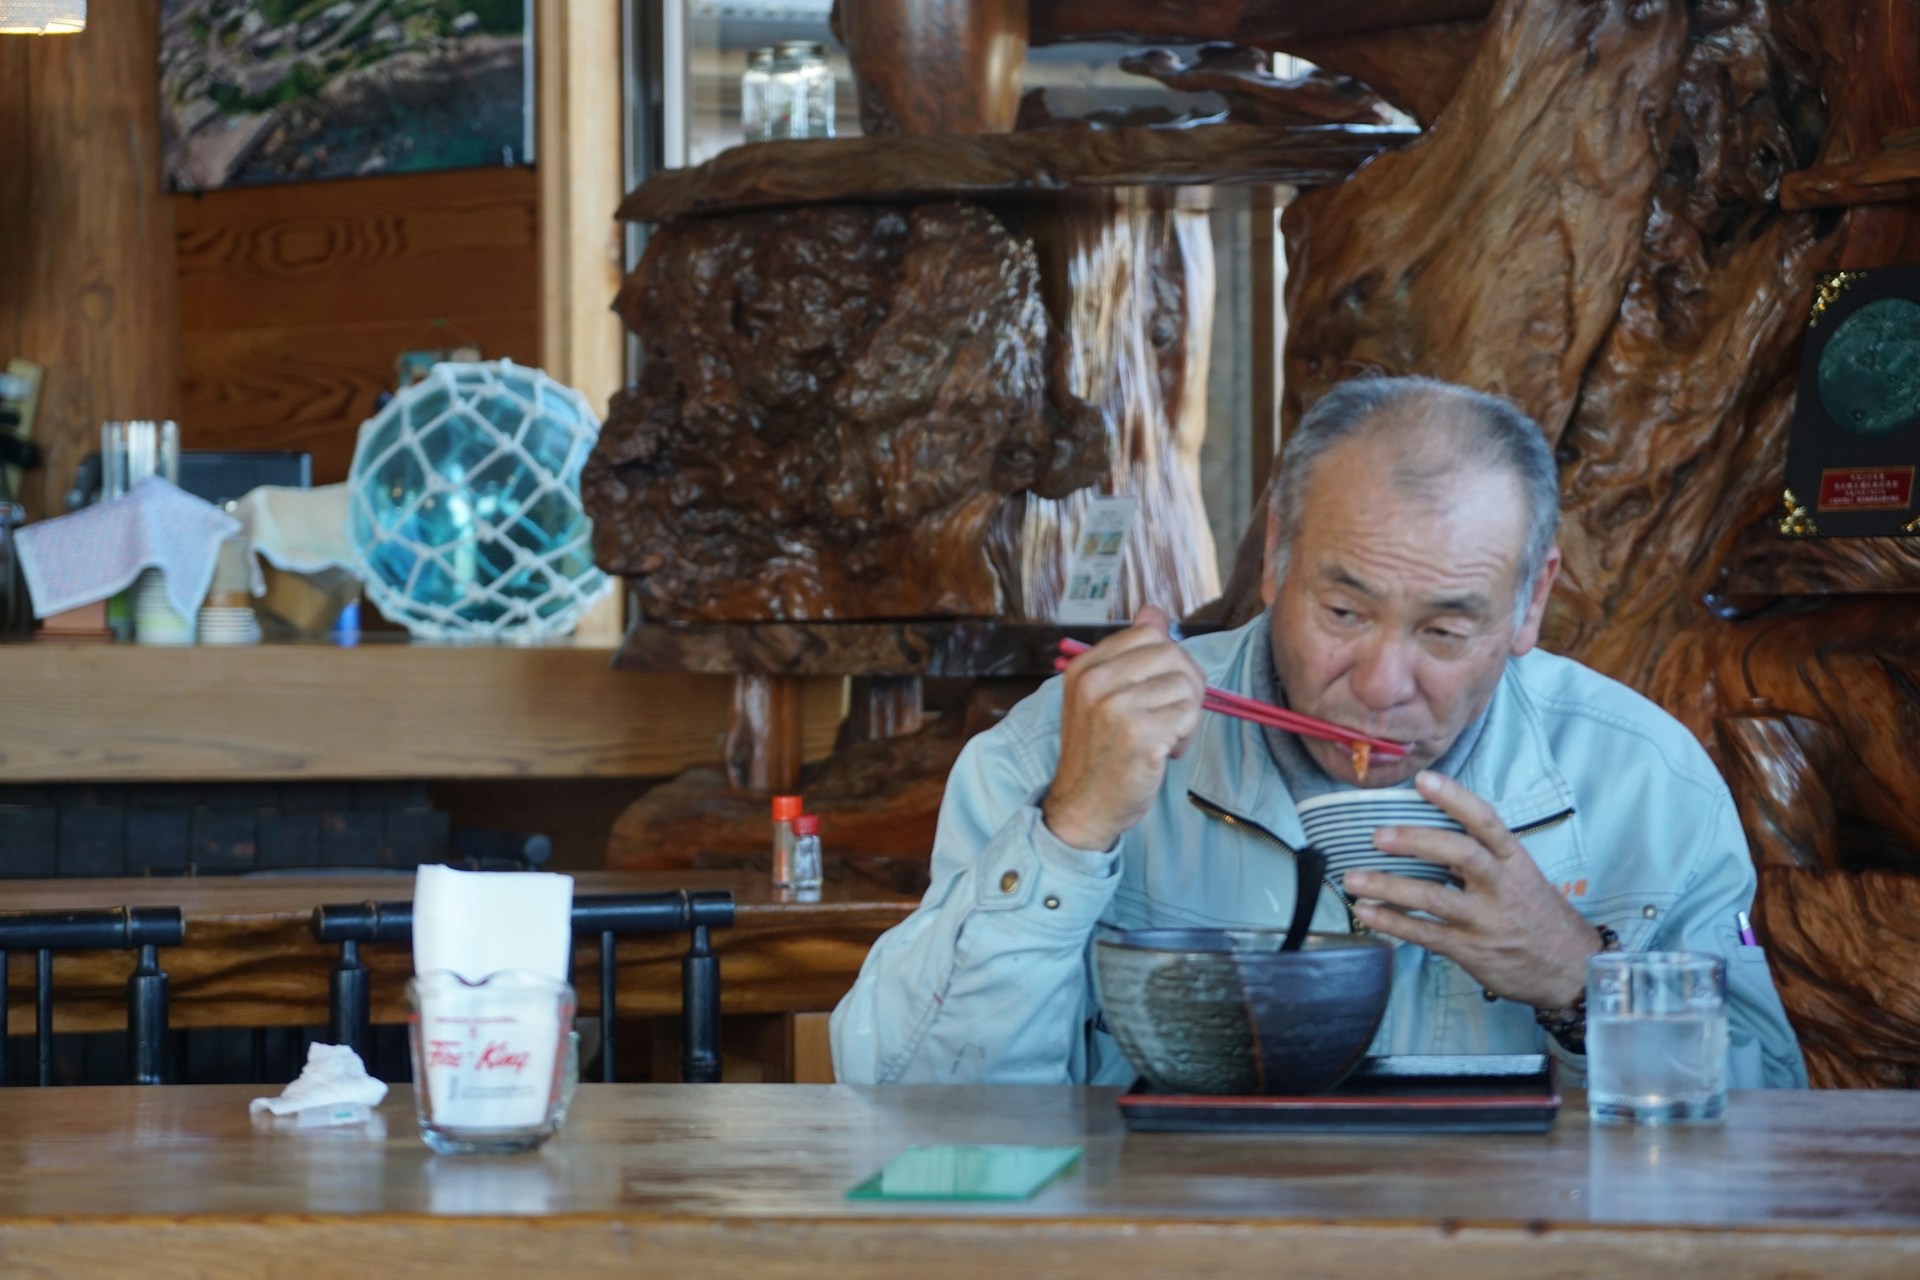 A Japanese man sitting at a table alone and eating.